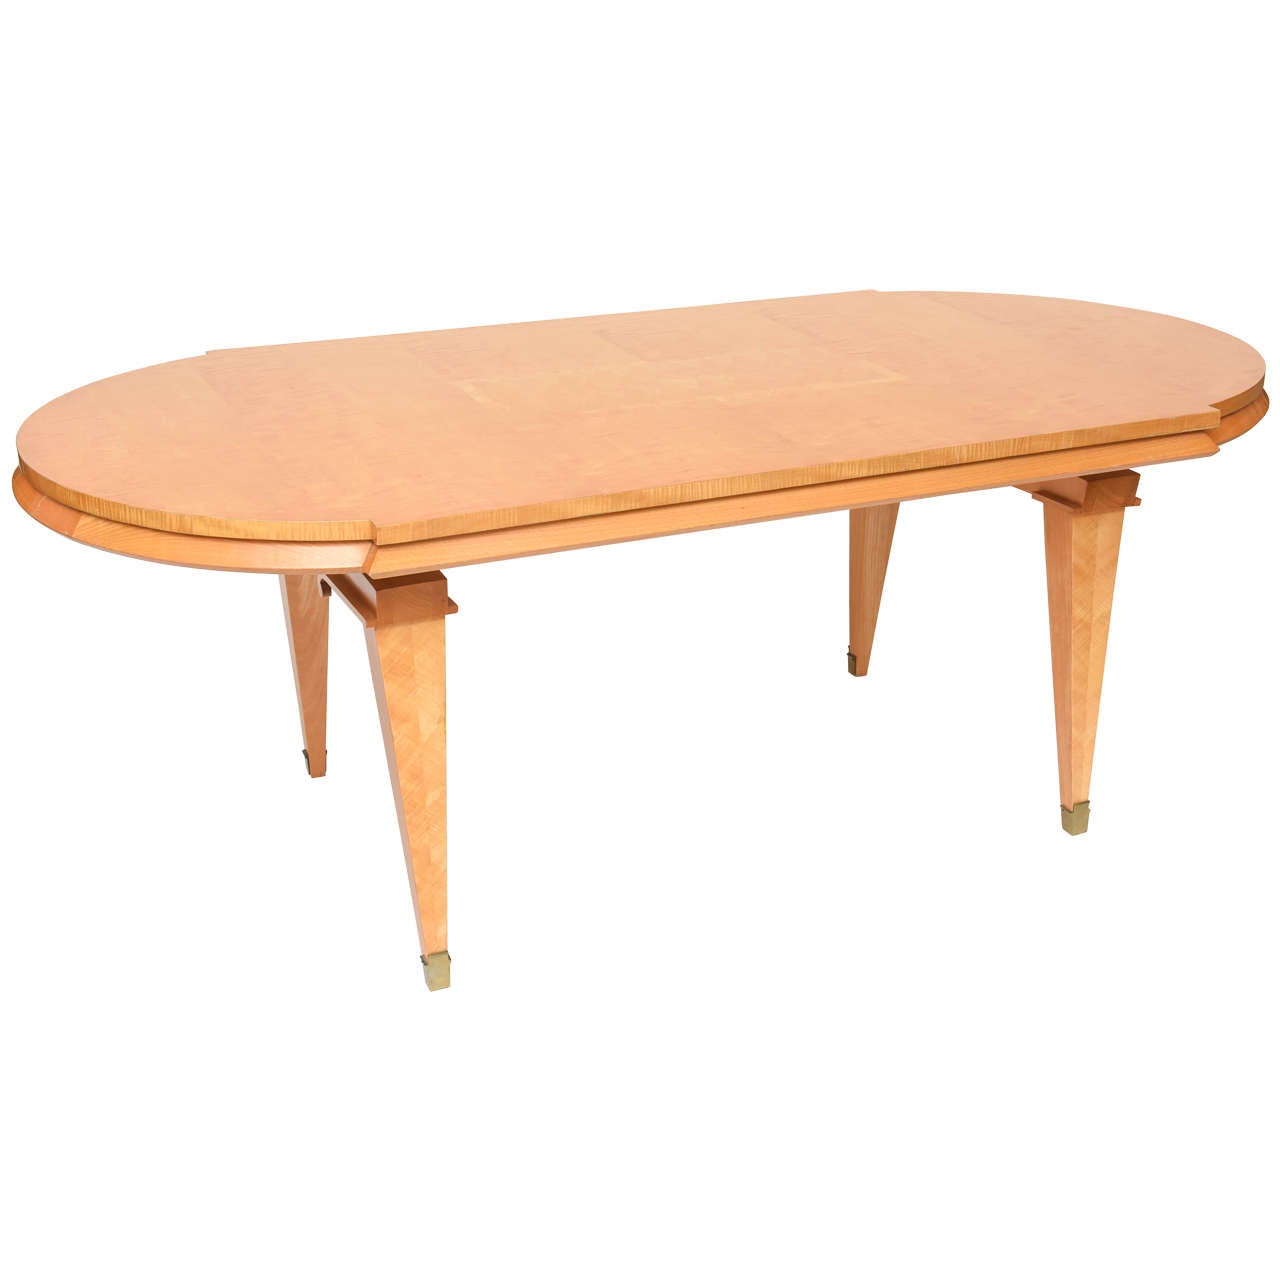 French Modern Sycamore Inlaid and Veneered Dining Table, Andre Arbus For Sale